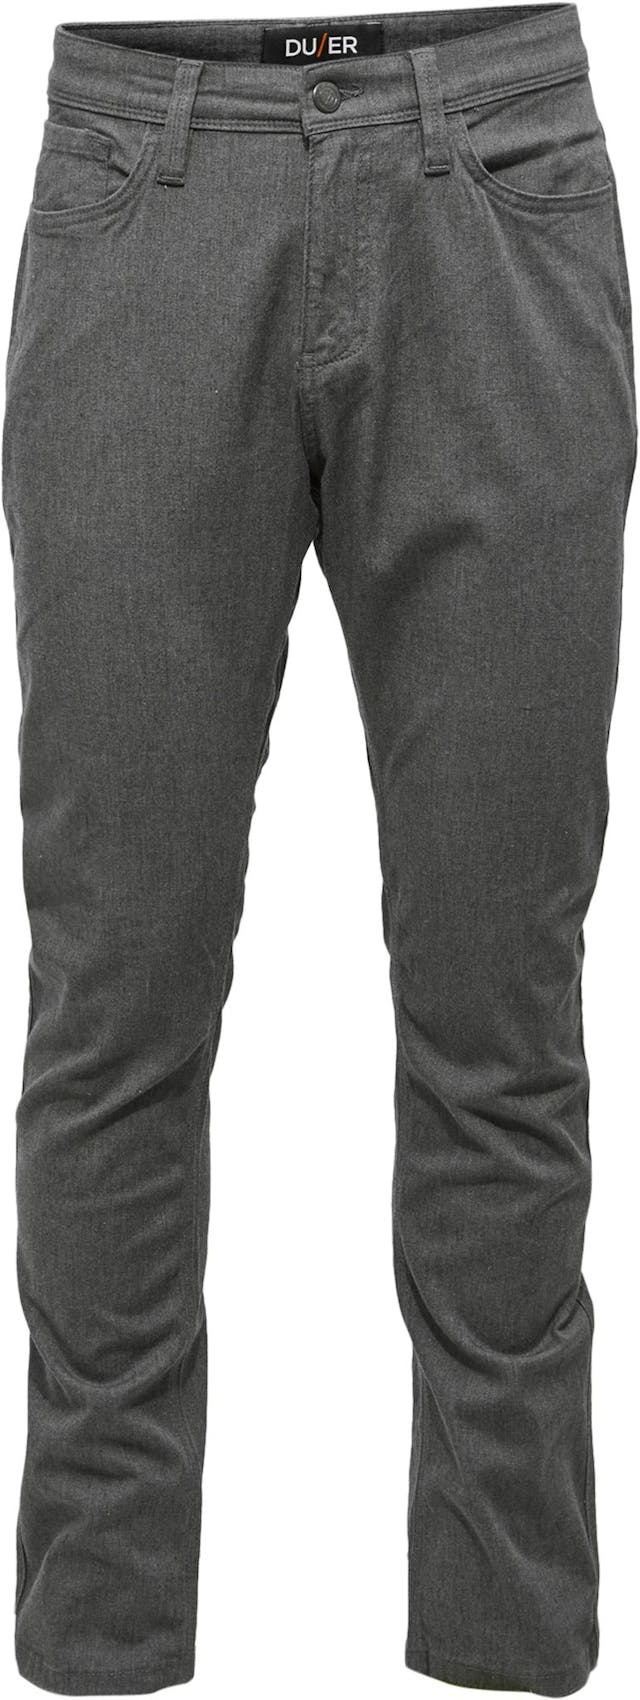 Product image for Live Free Relaxed Taper Pant - Men's